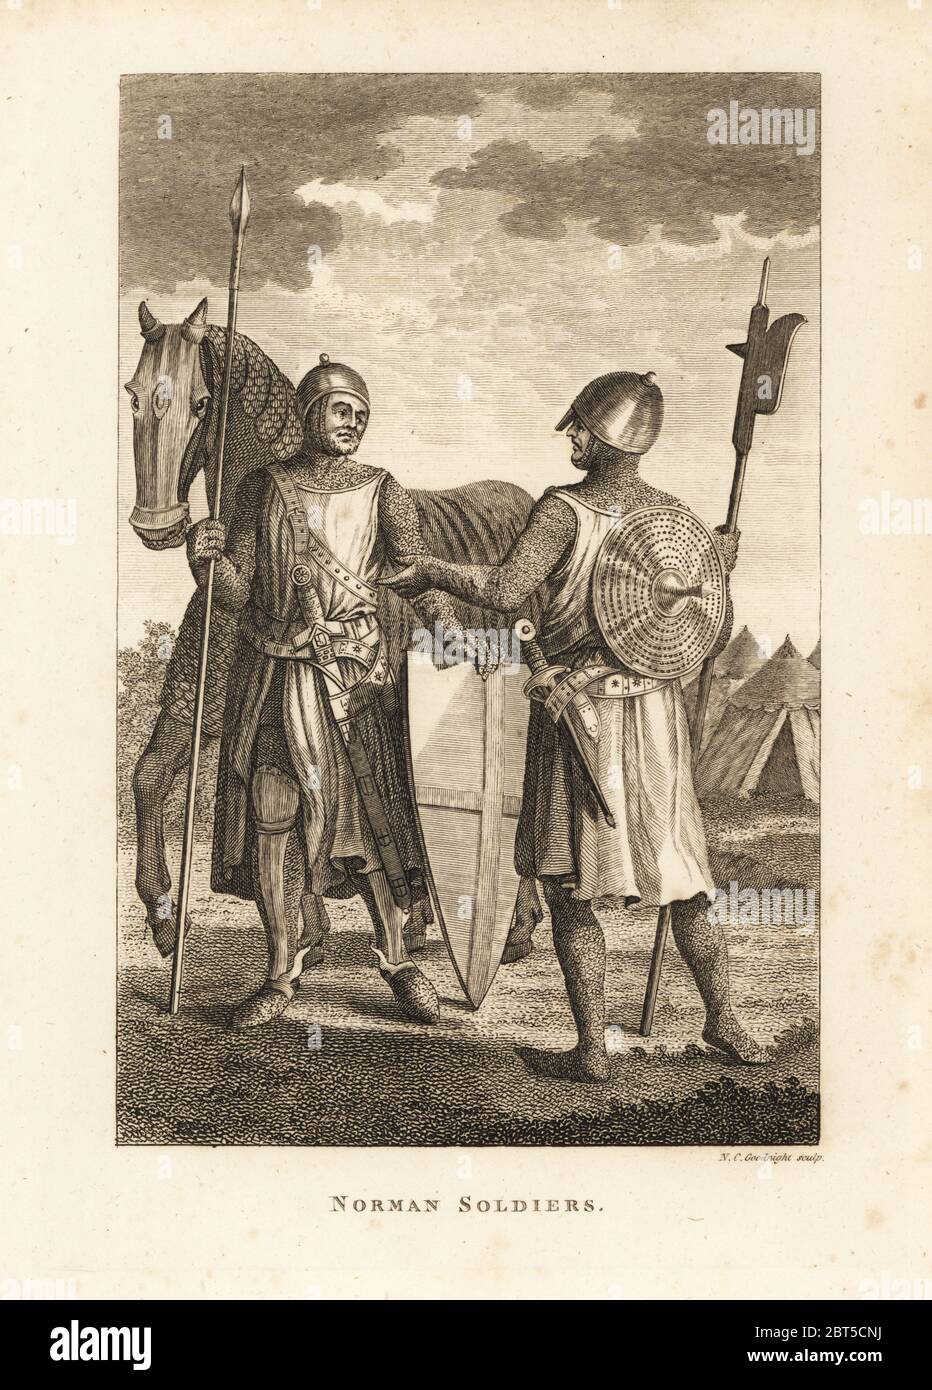 Norman soldiers in chainmail and plate armour with shield, lance, halberd, in front of military campaign tents. Copperplate engraving by N.C. Goodnight from Francis Grose's Military Antiquities respecting a History of the English Army, Stockdale, London, 1812. Stock Photo